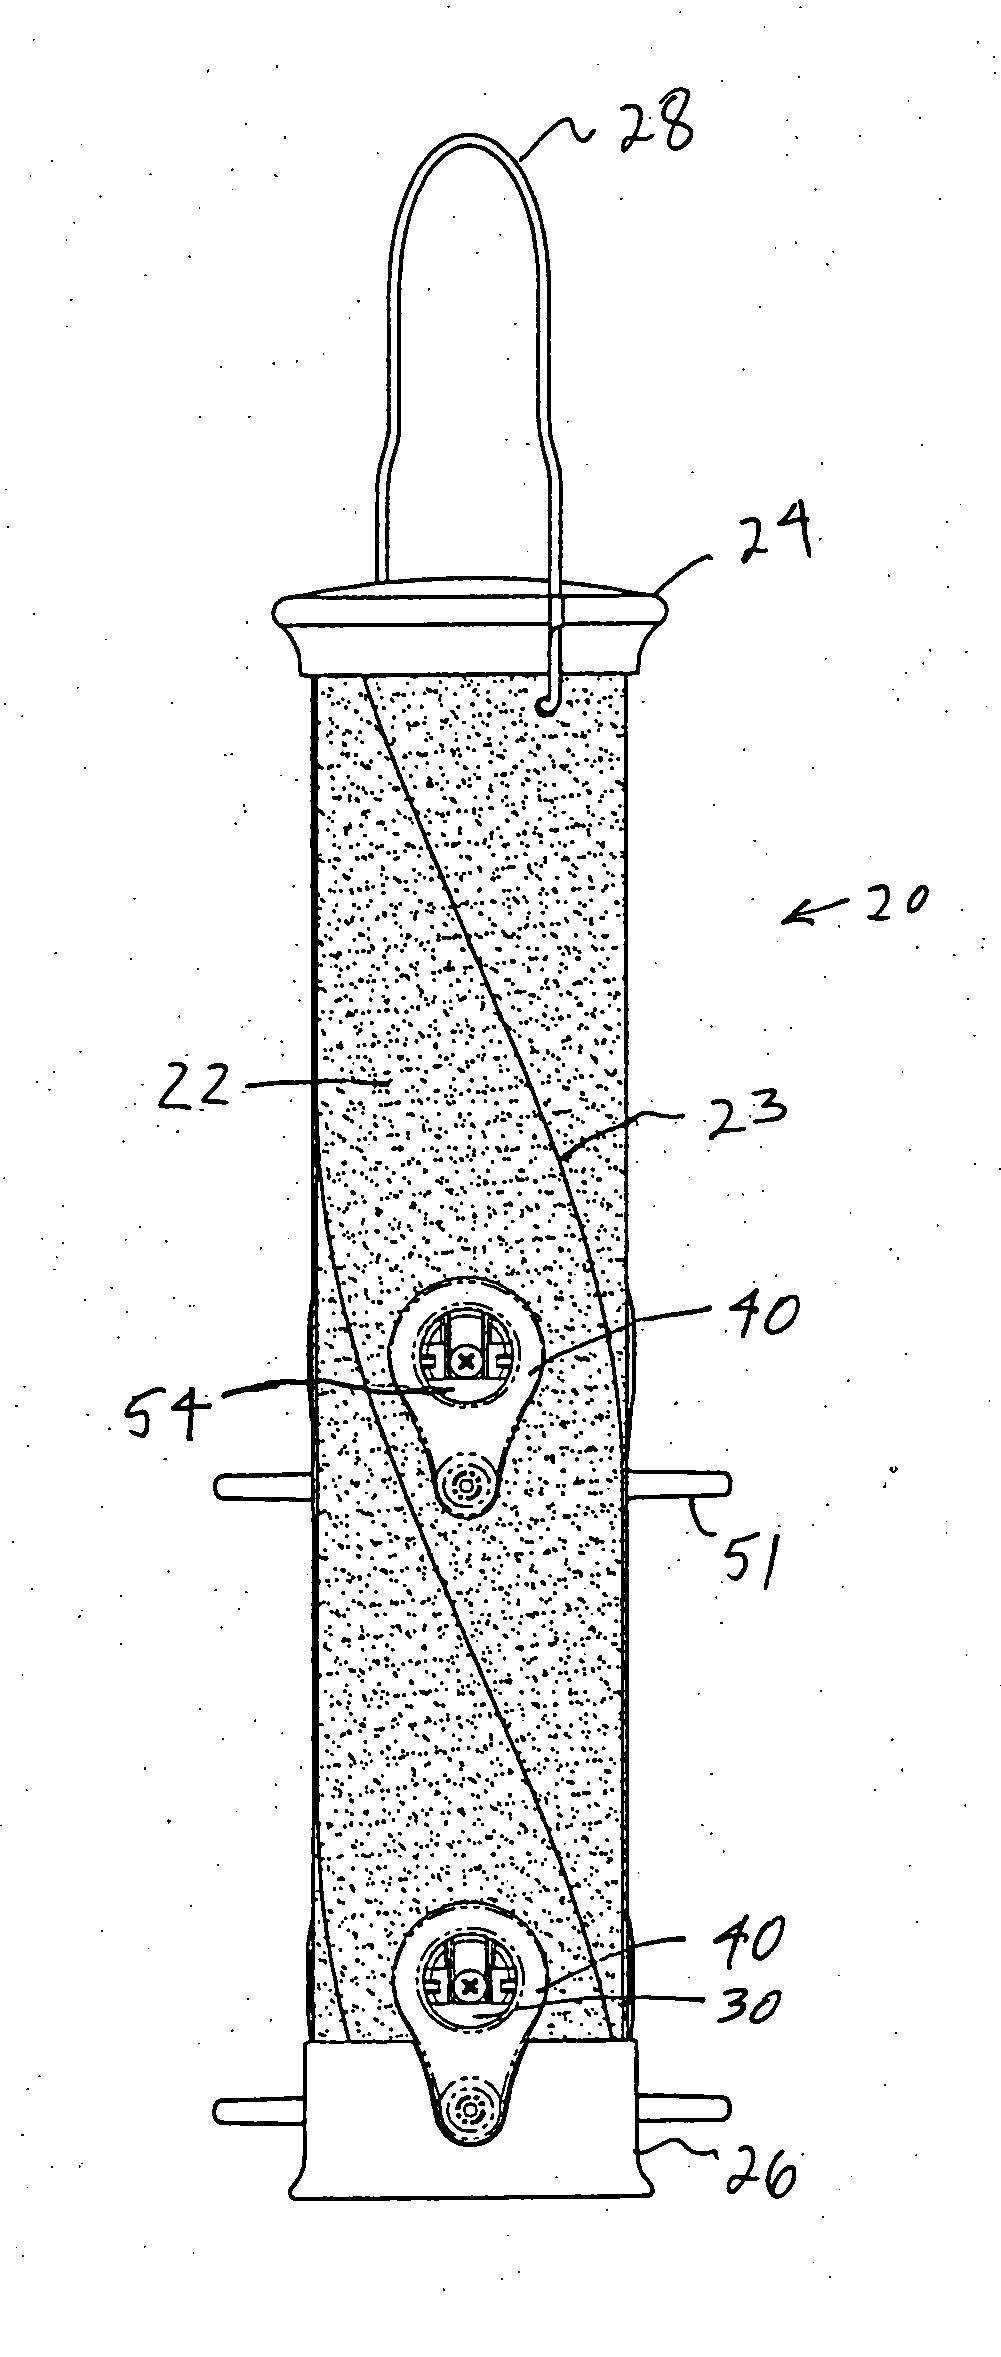 Port attachment system for bird feeders and the like